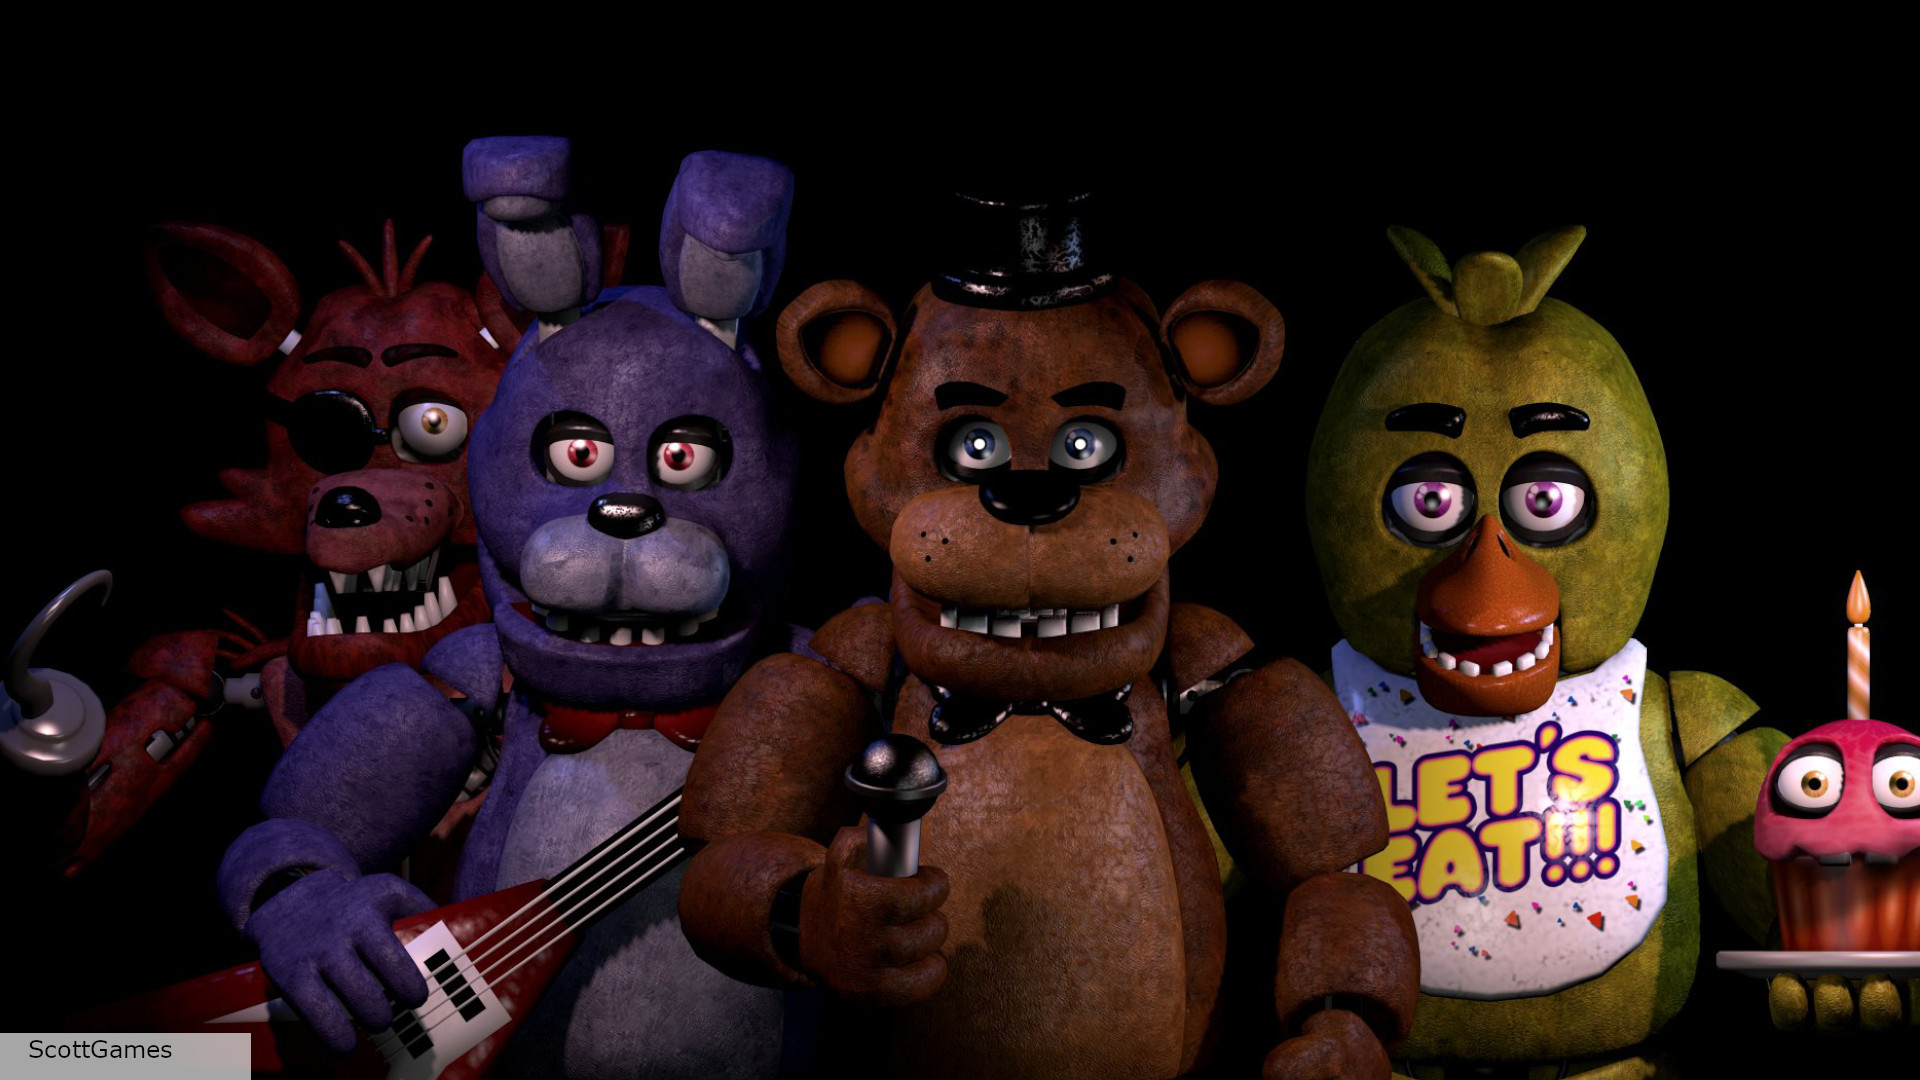 The Five Nights at Freddy's movie starts filming next year